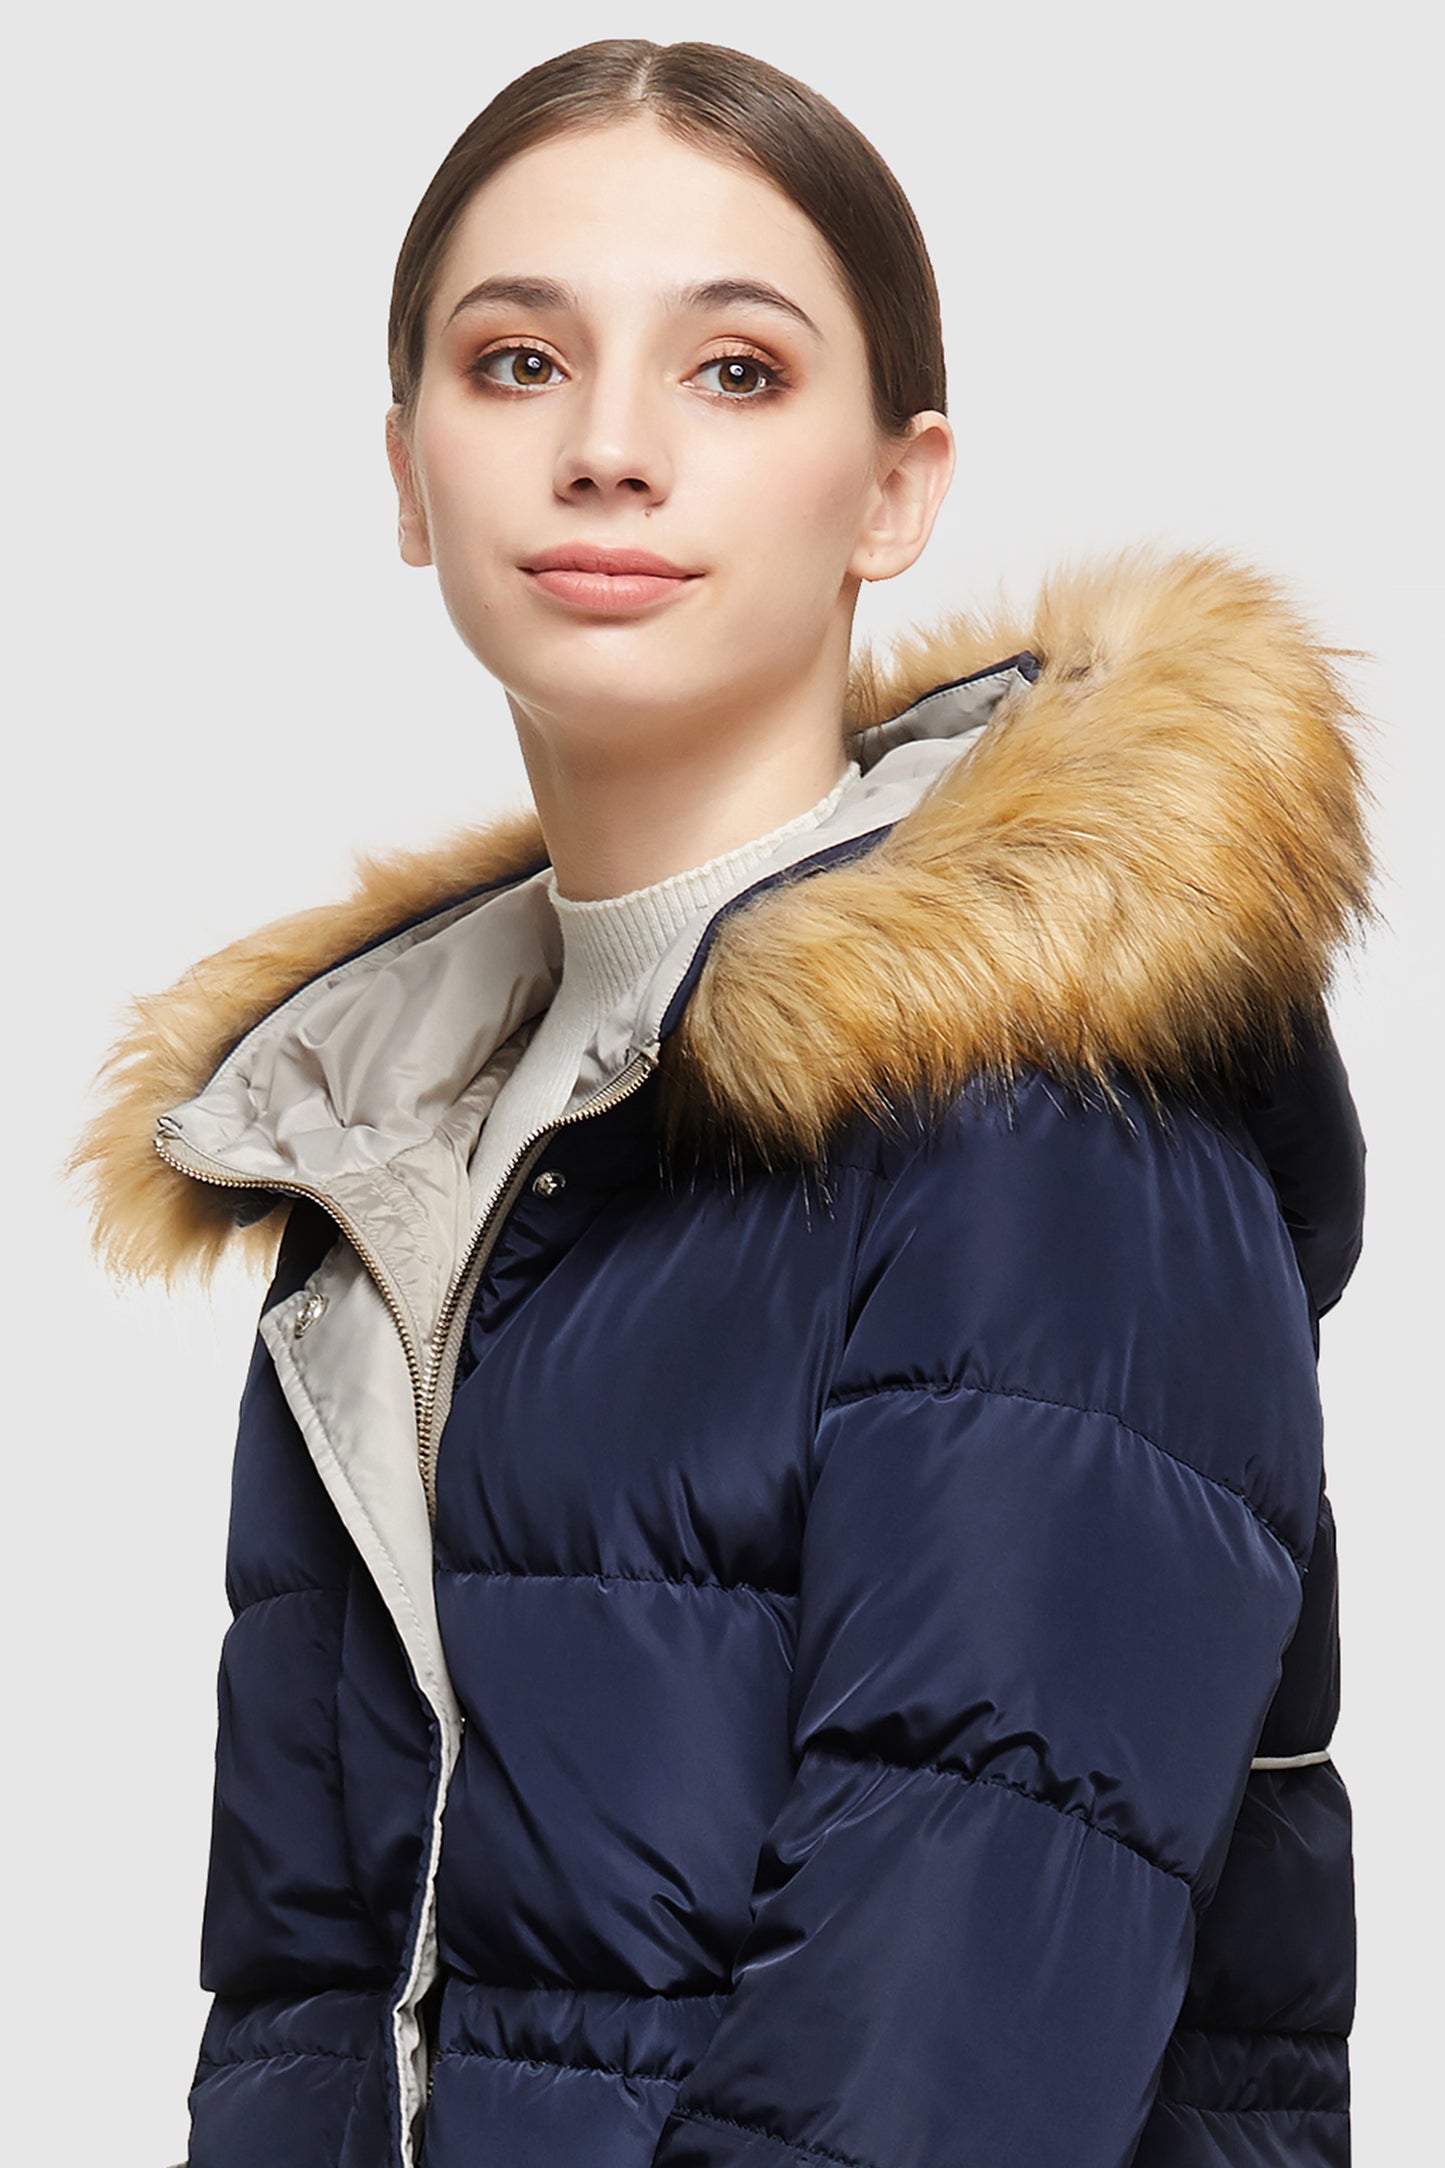 Casual Mid Length Down Coat with Hood